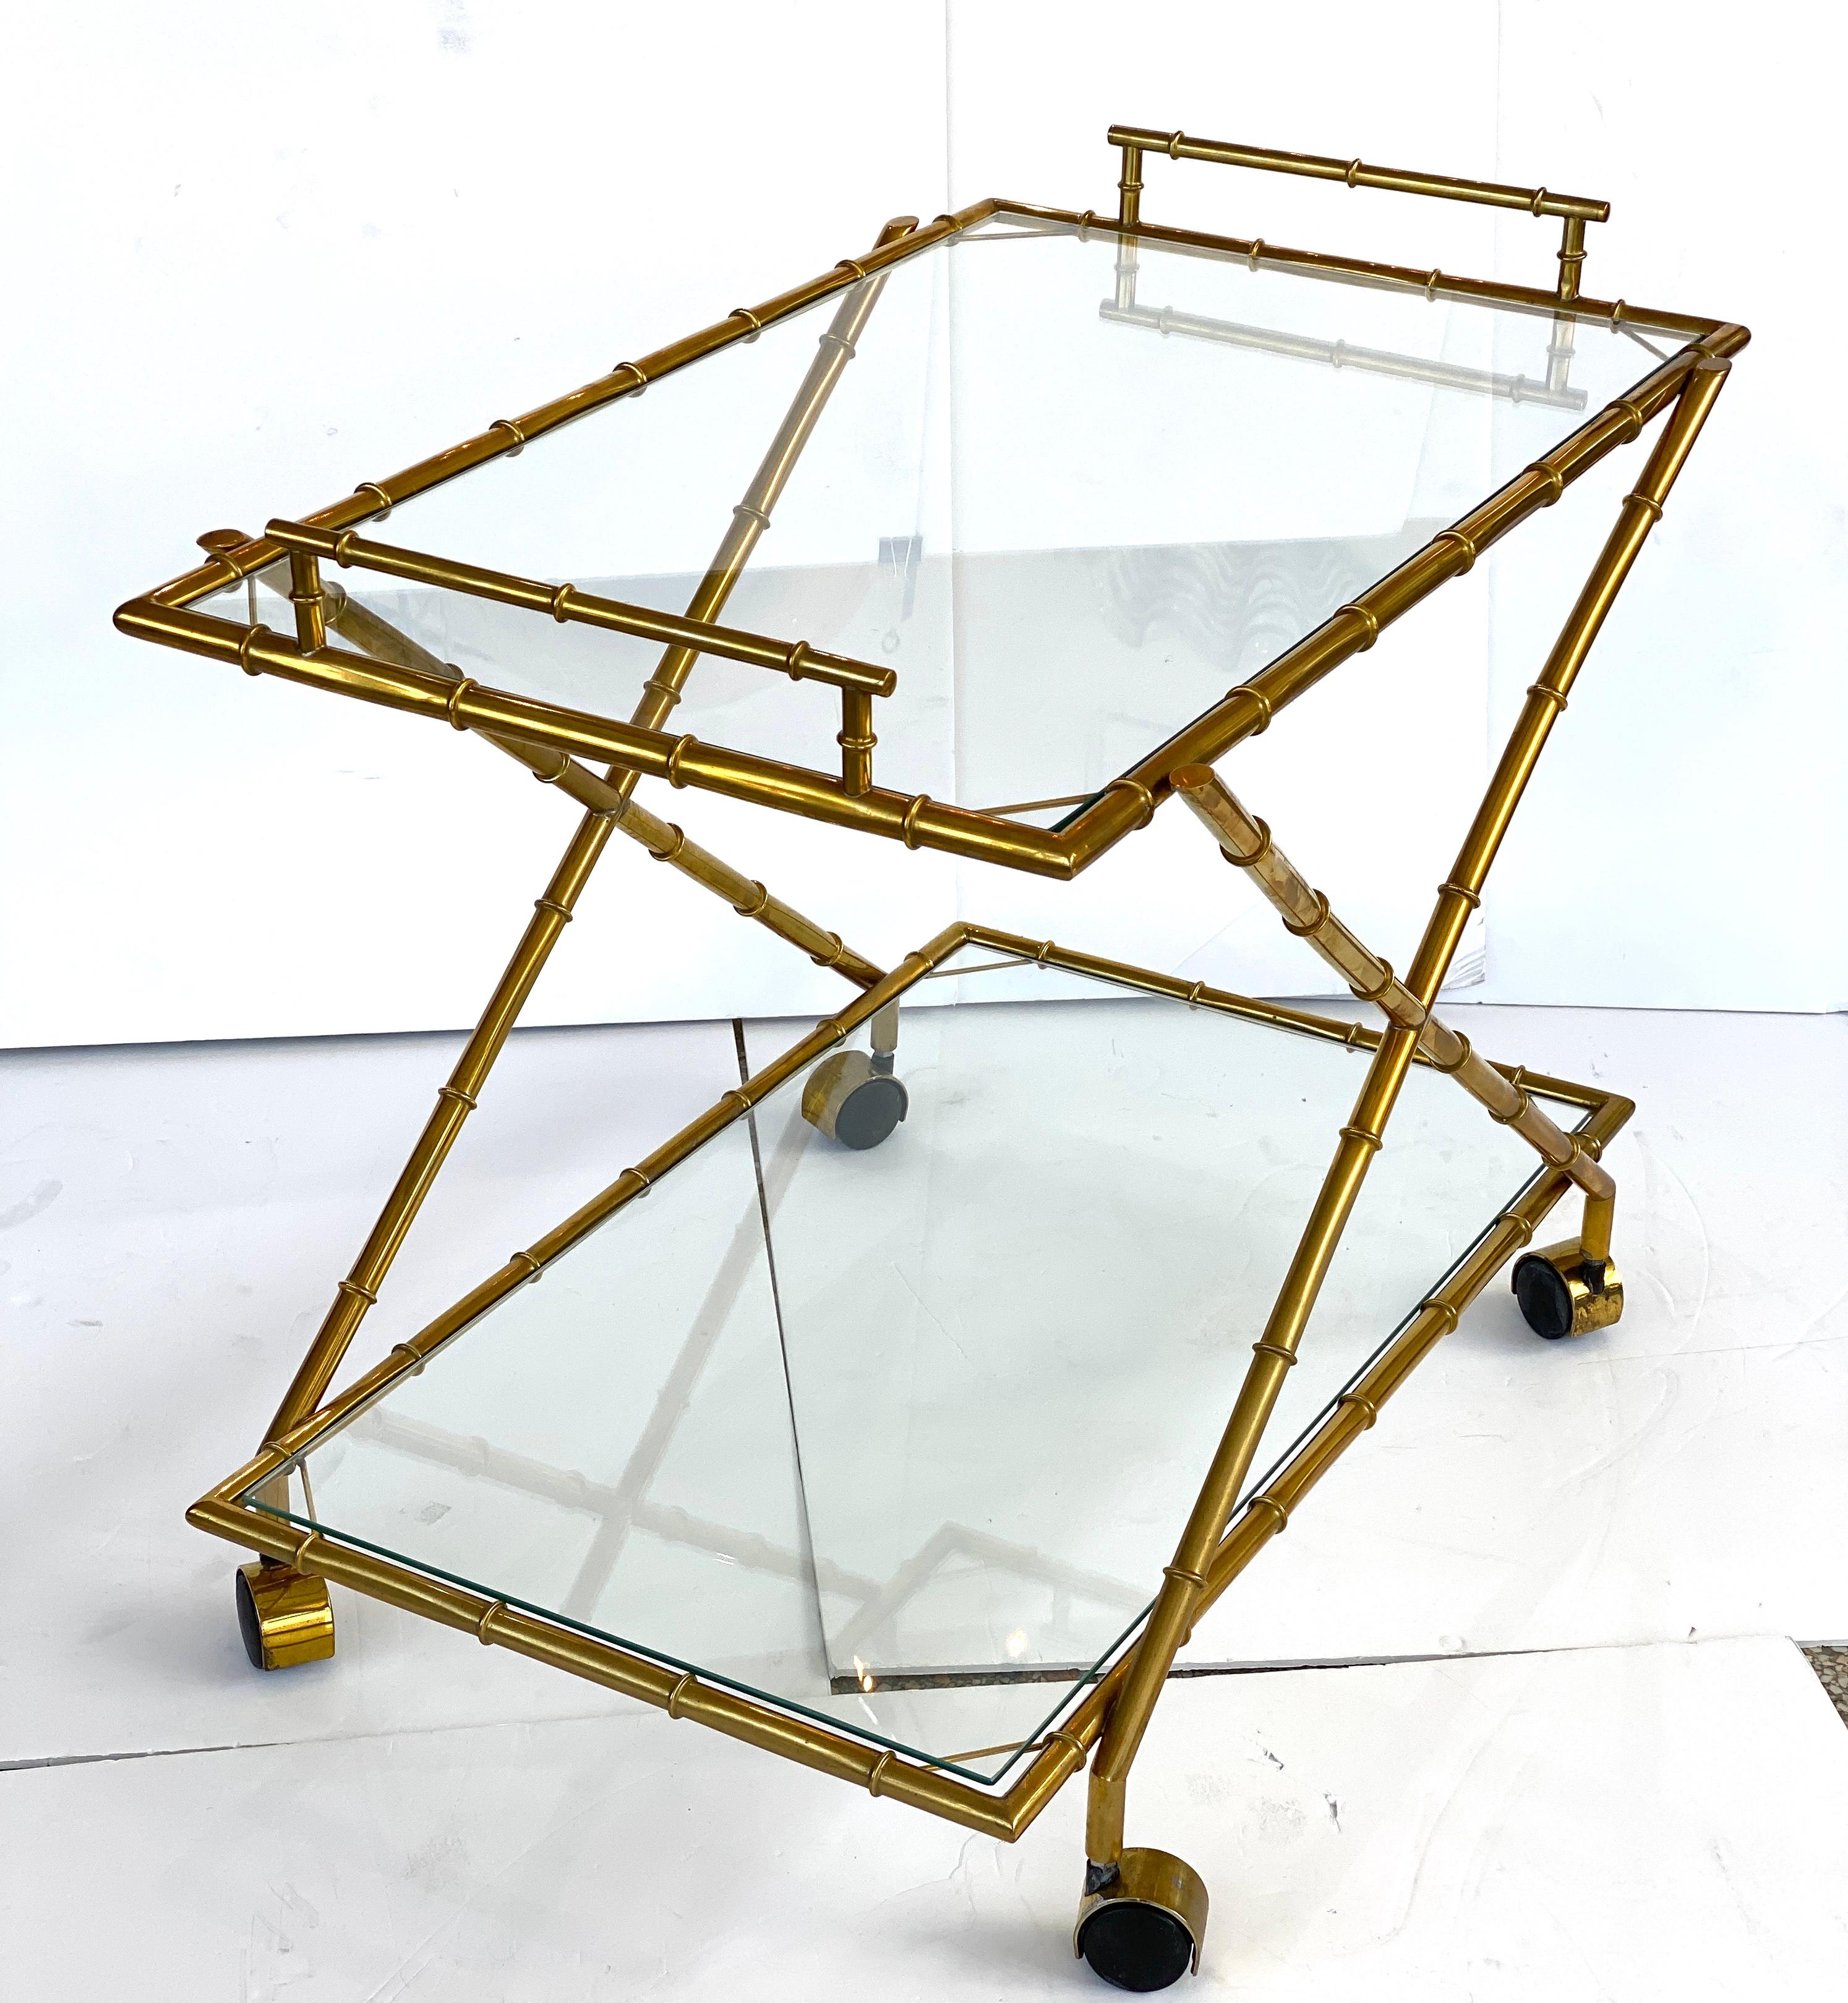 This stylish Hollywood Regency inspired bar cart with its faux bamboo frame and clear glass shelves will make a subtle statement for you barware.